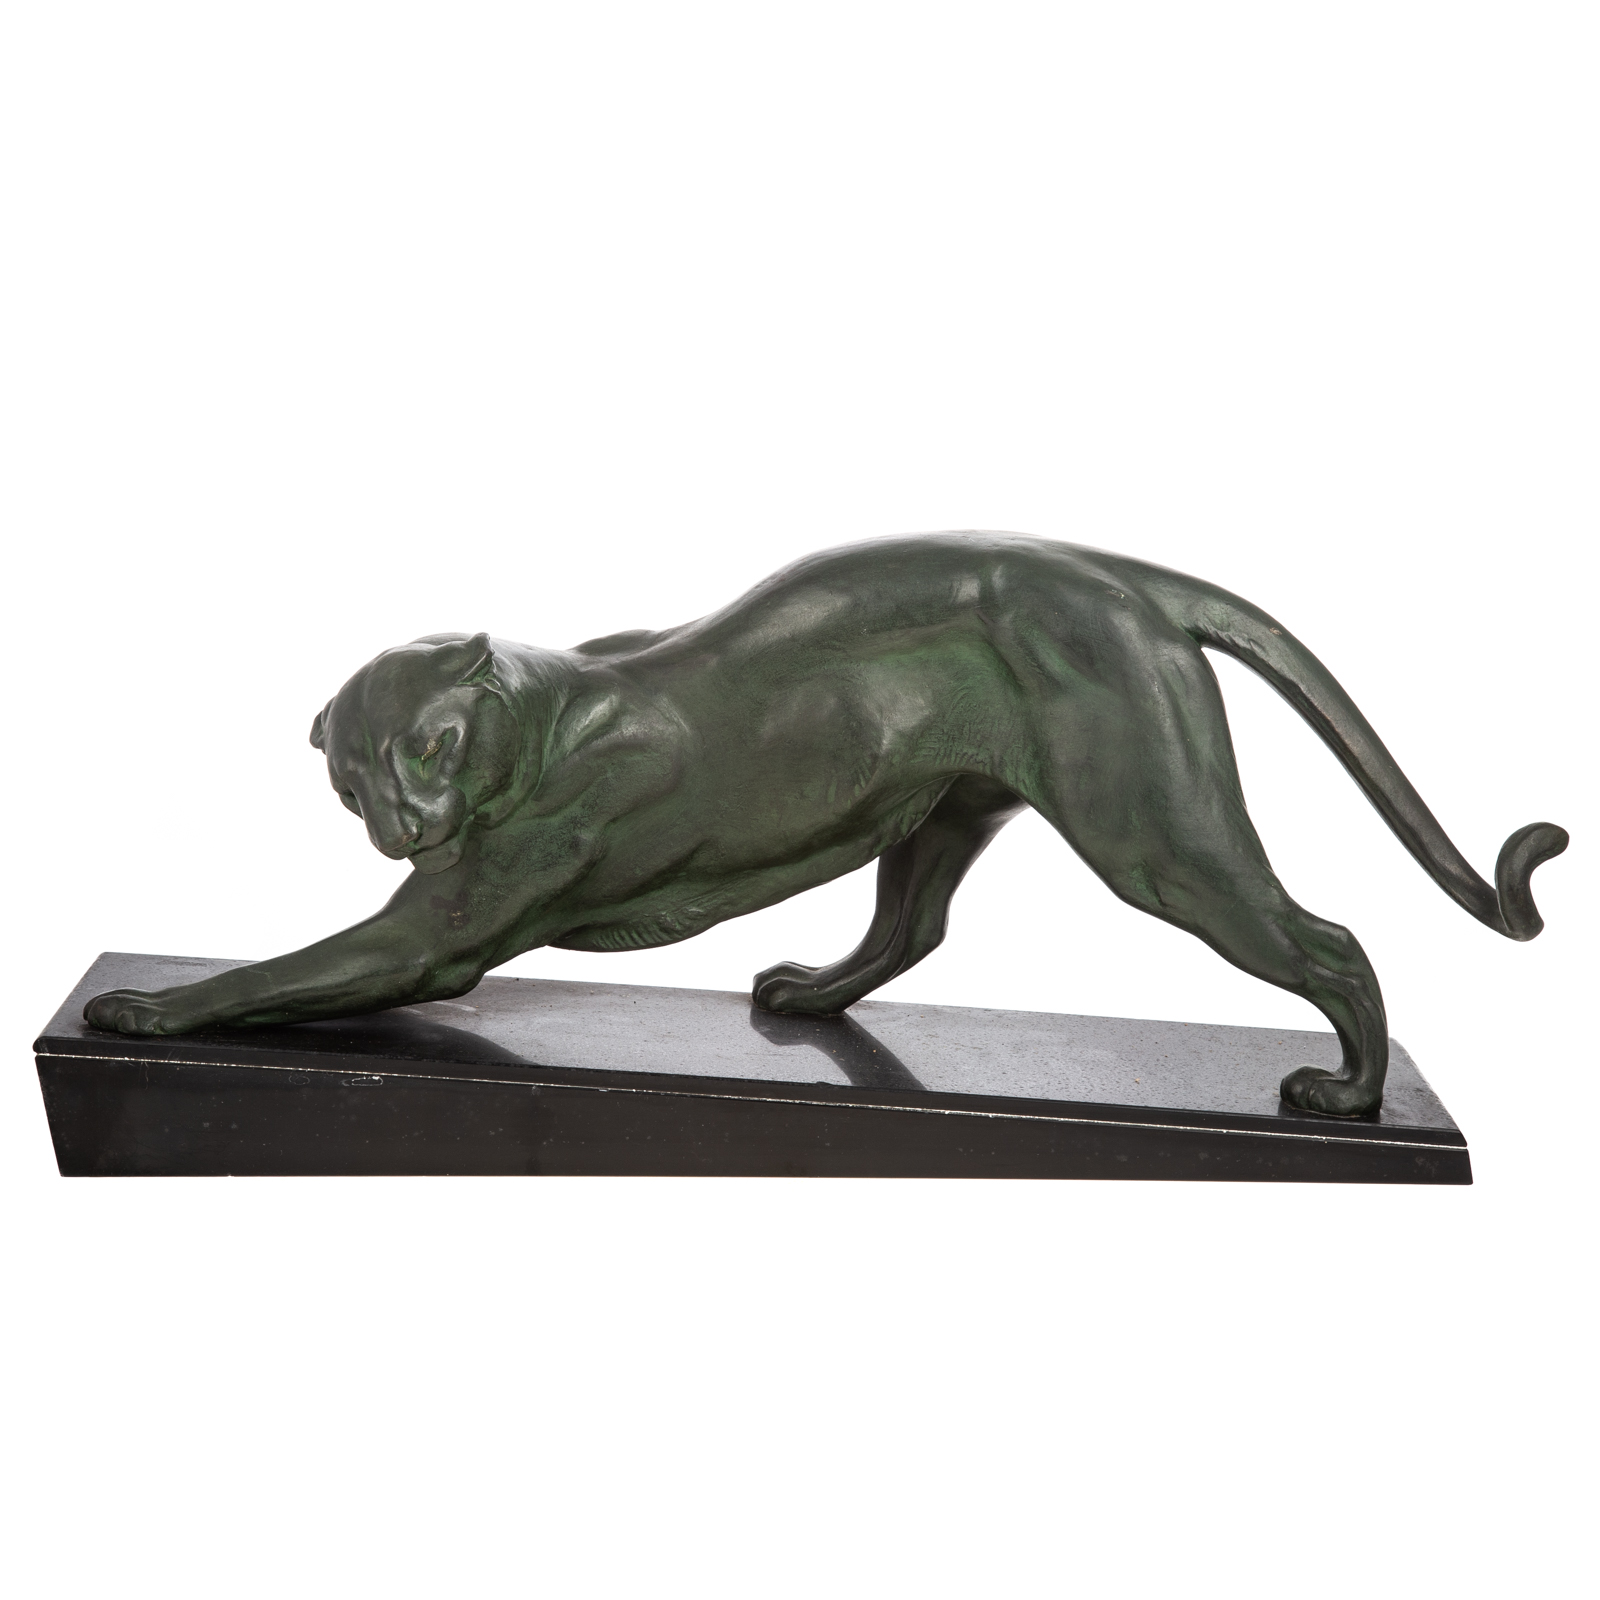 PLAGNET, PROWLING PANTHER SPELTER